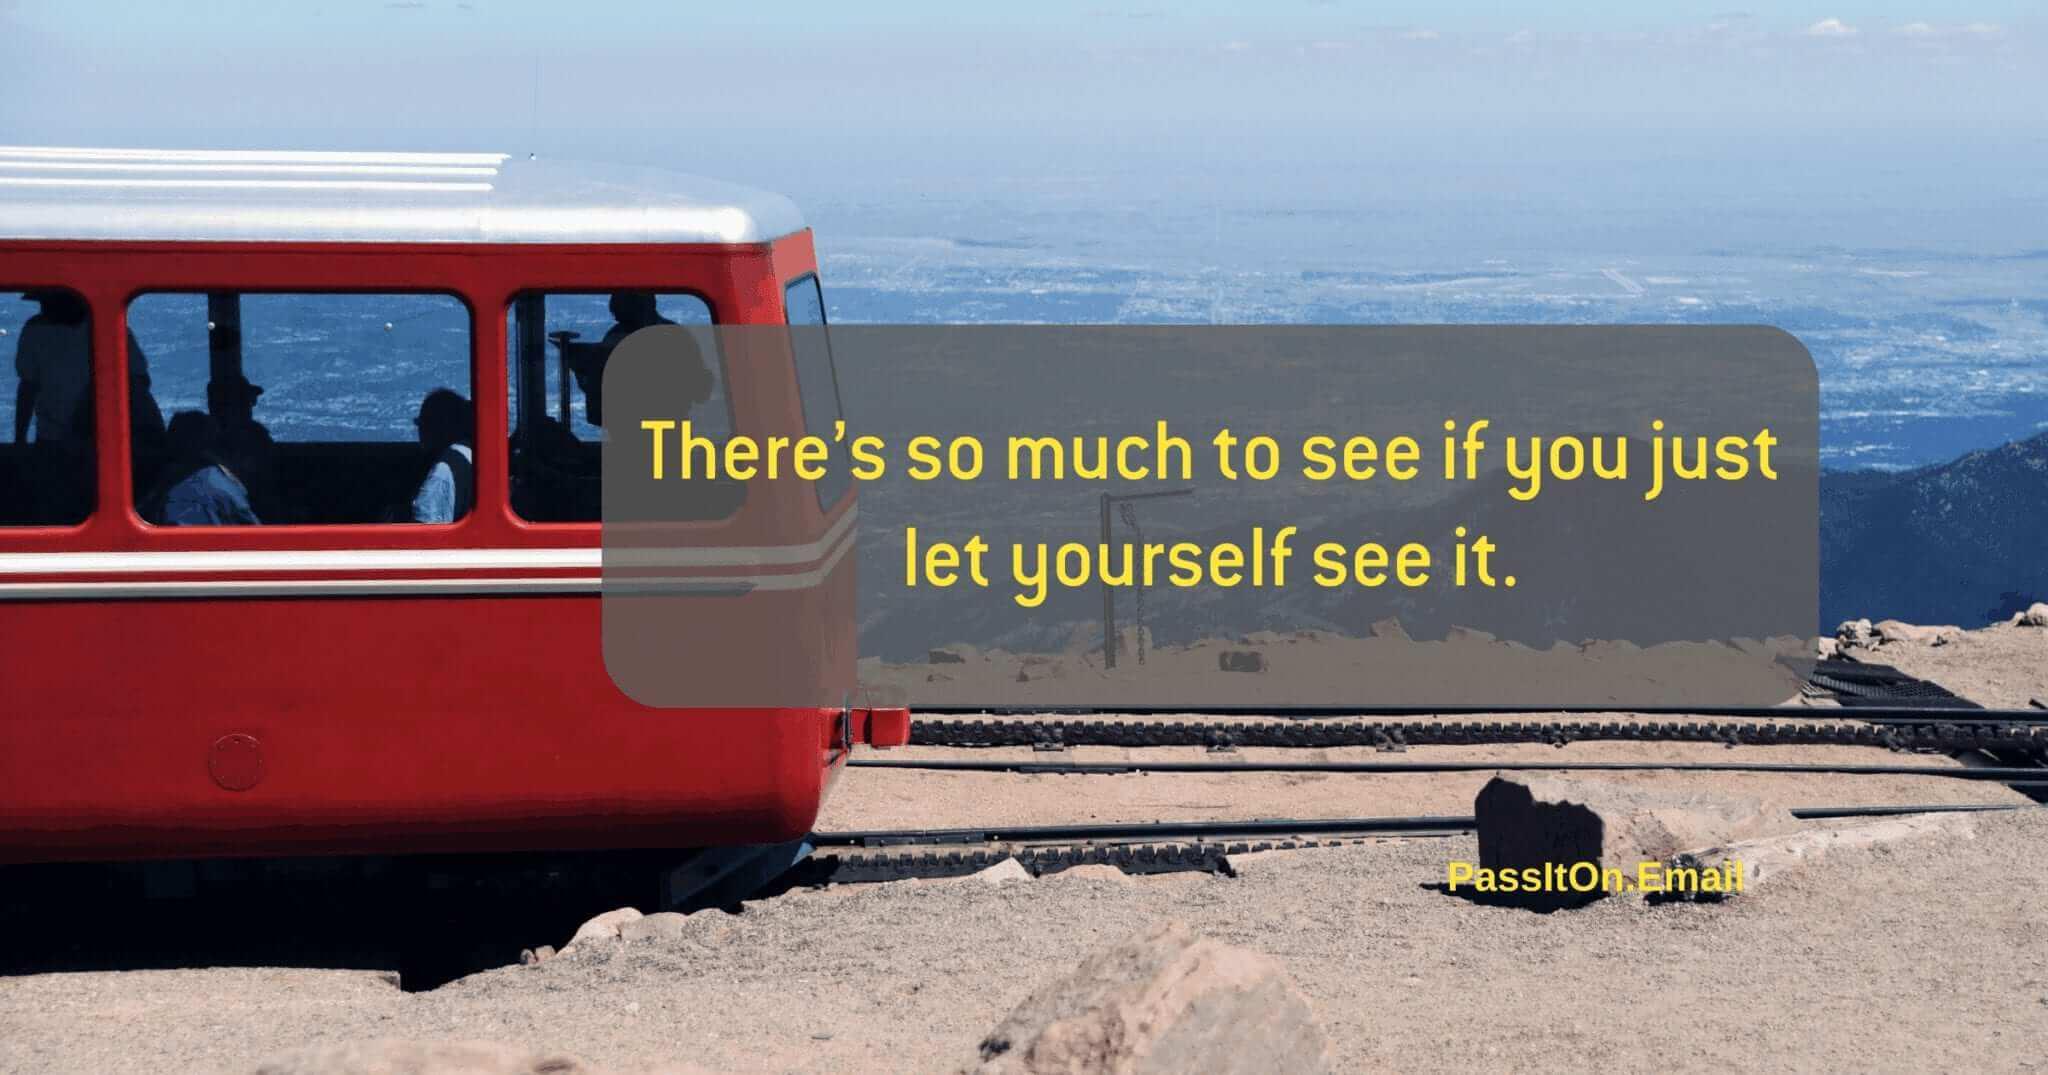 There’s so much to see if you just let yourself see it